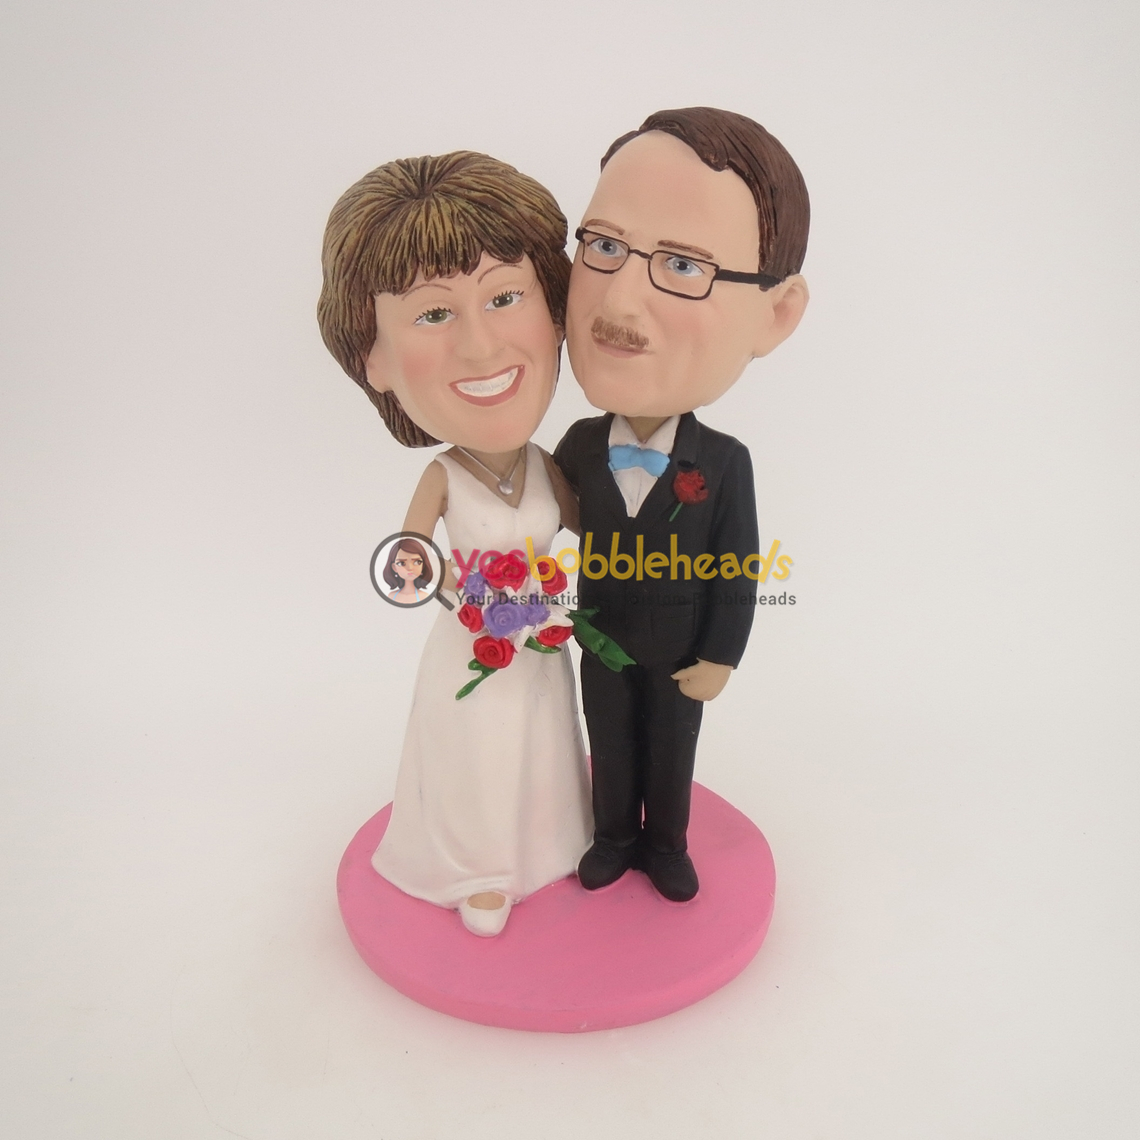 Picture of Custom Bobblehead Doll: Black Suit & White Wedding Dress Arms Crossed Wedding Couple